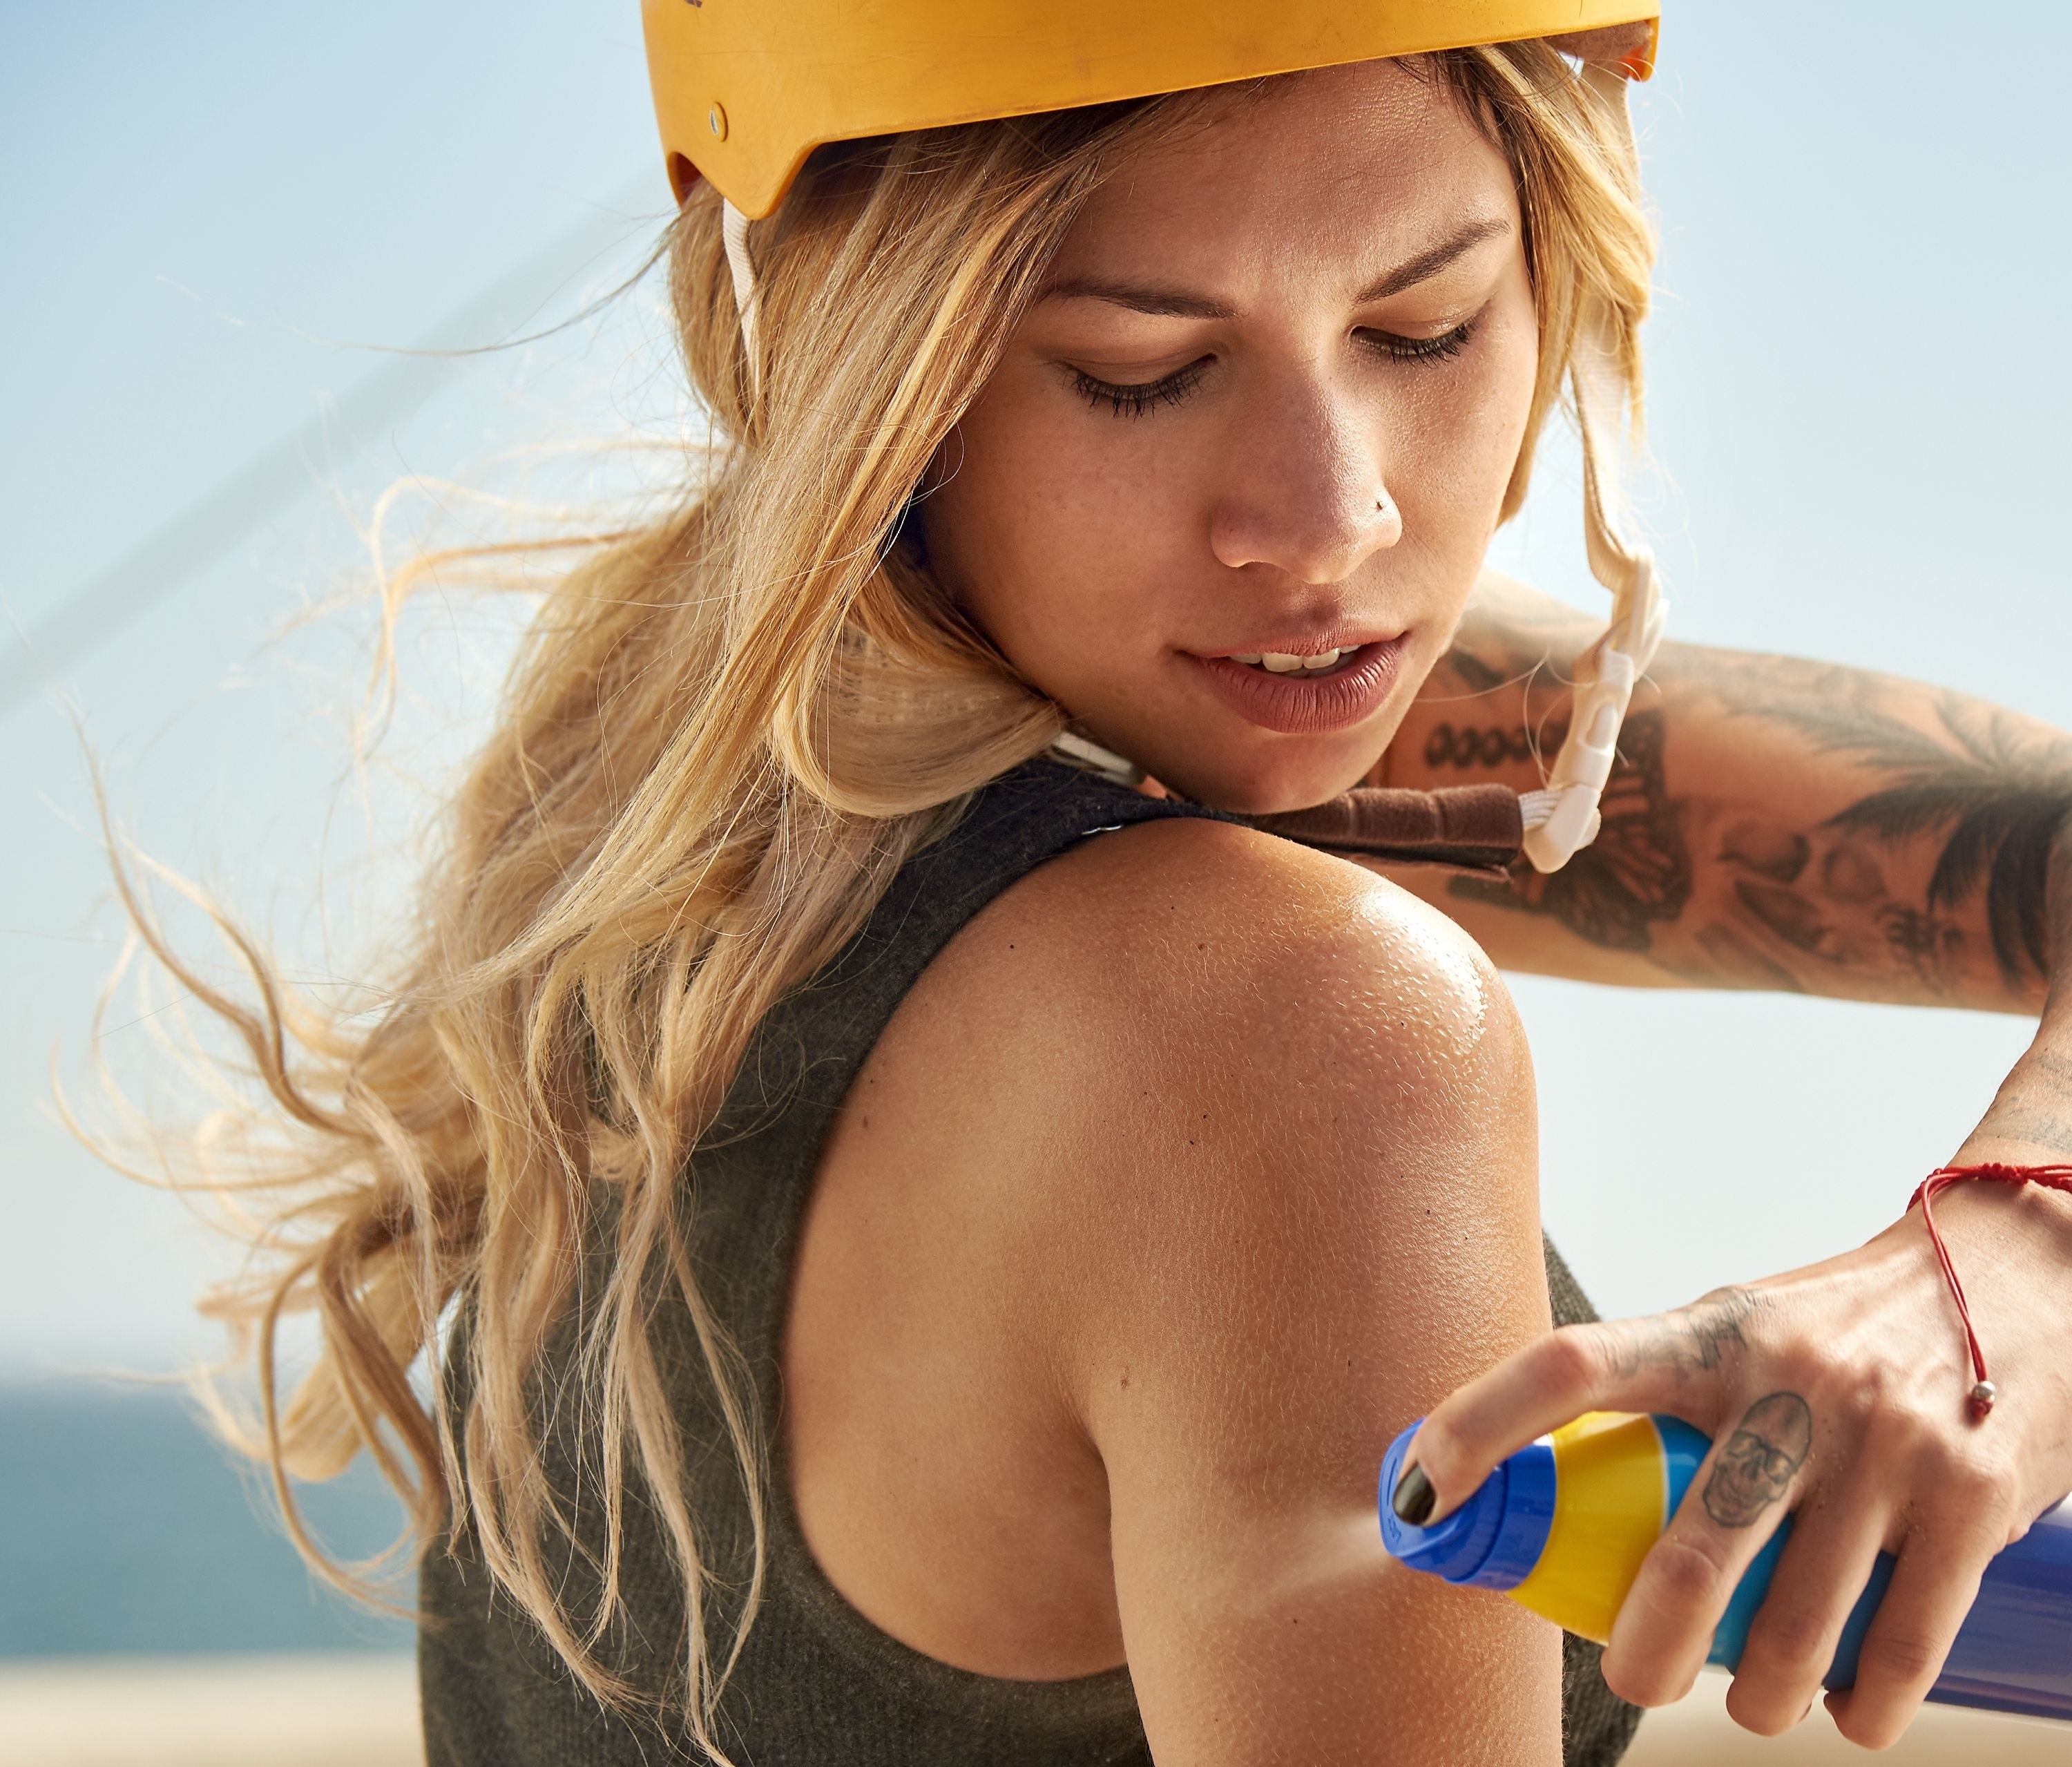 A model applying spray sunscreen to their arm and shoulder